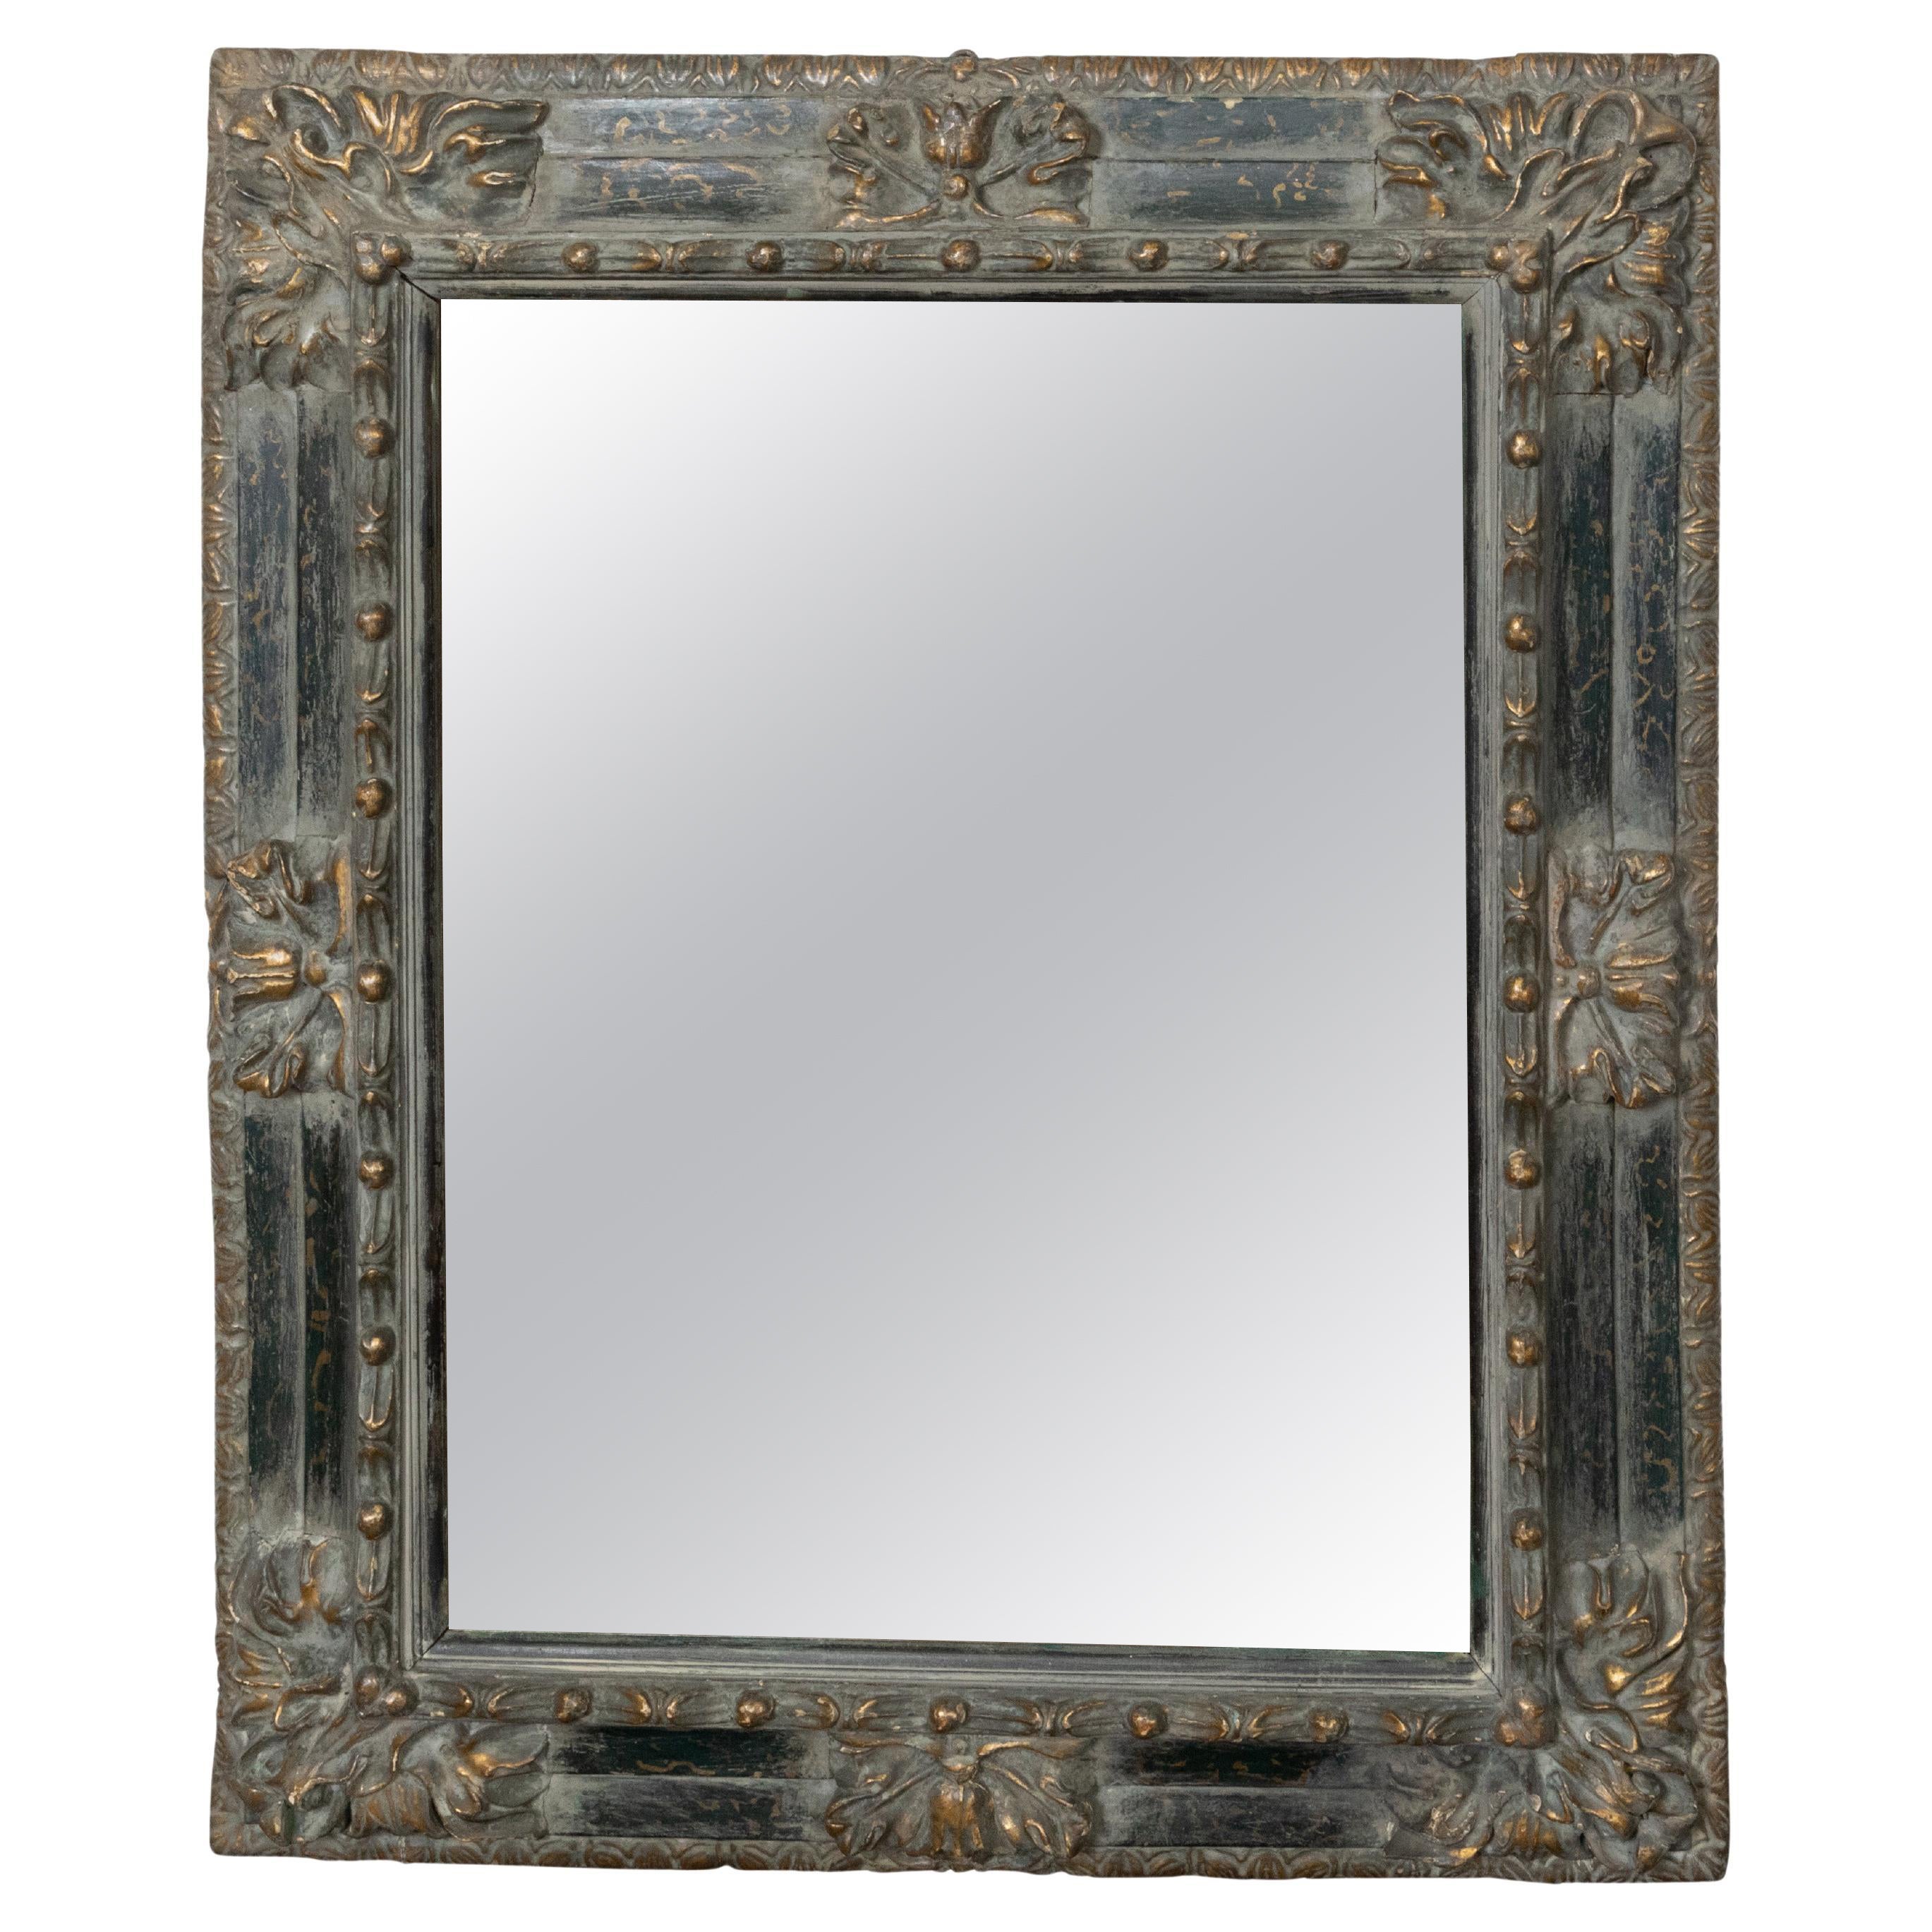 Italian 18th Century Carved and Parcel-Gilt Wooden Mirror with Foliage